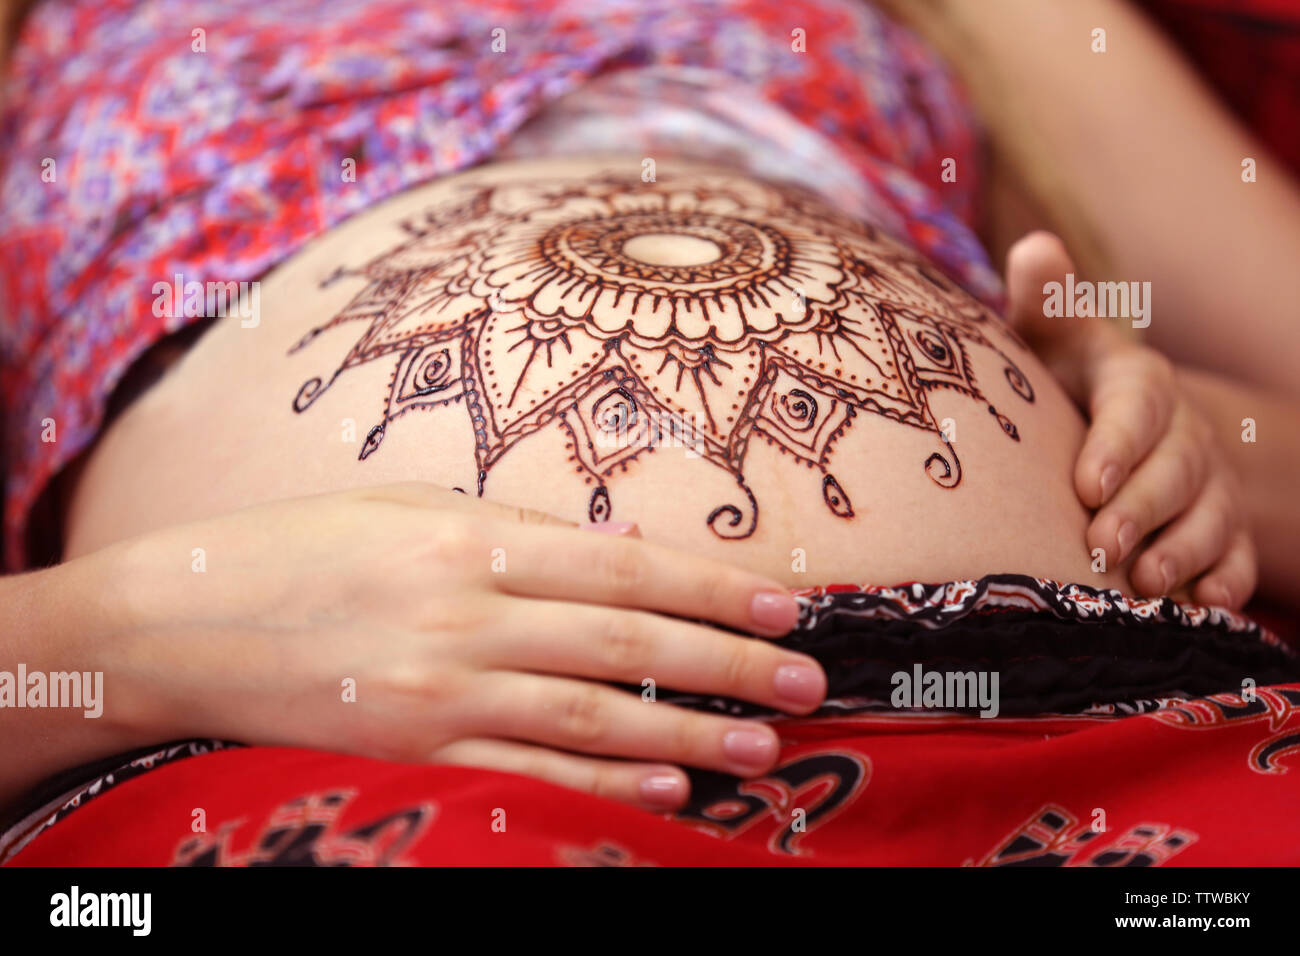 Henna tattoo on pregnant belly Stock Photo by belchonock 126259662